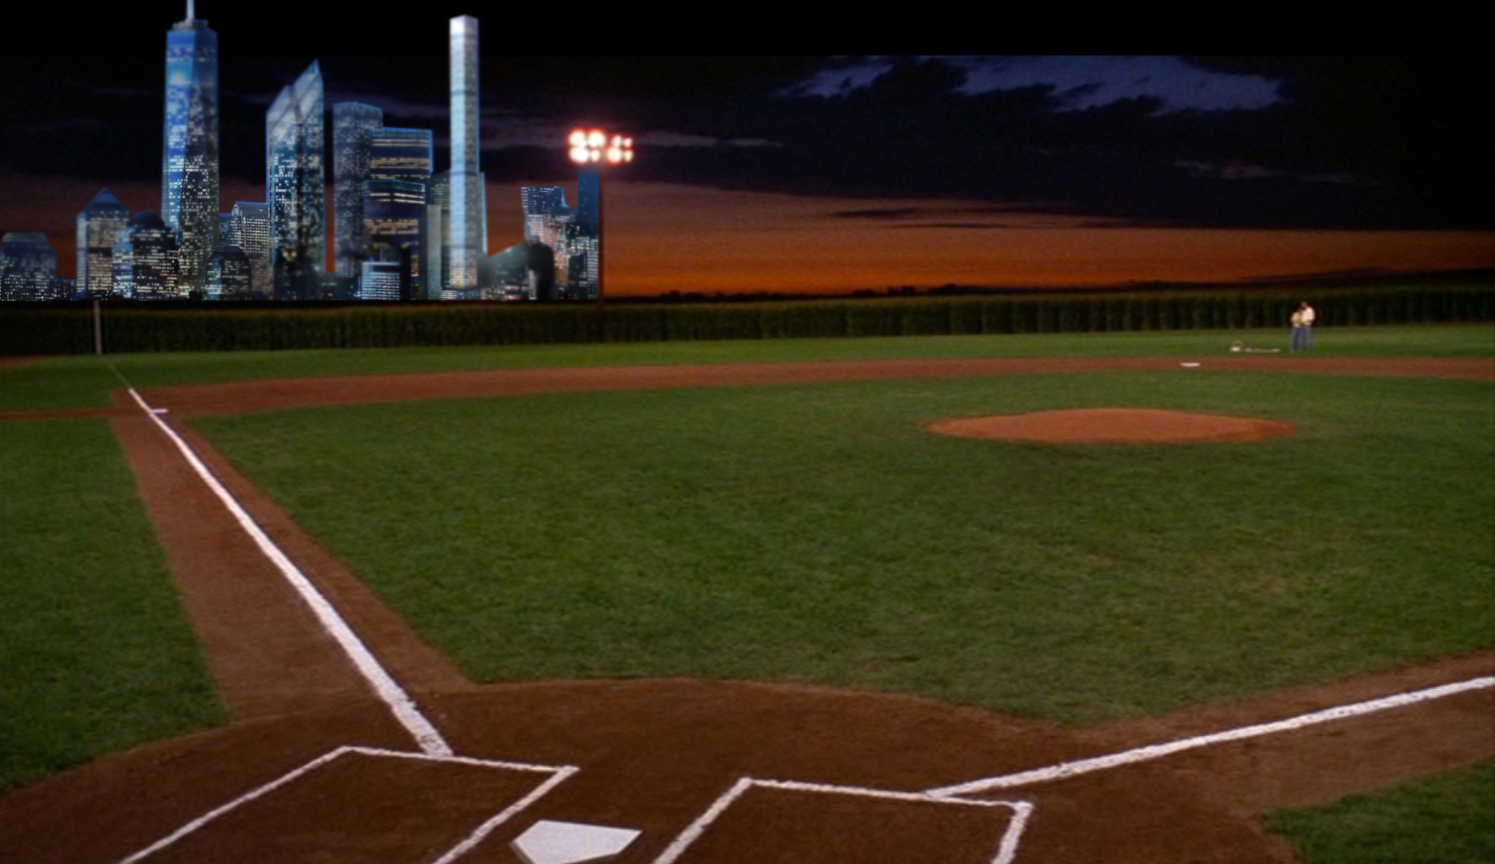 Field of Dreams baseball park with skyscrapers